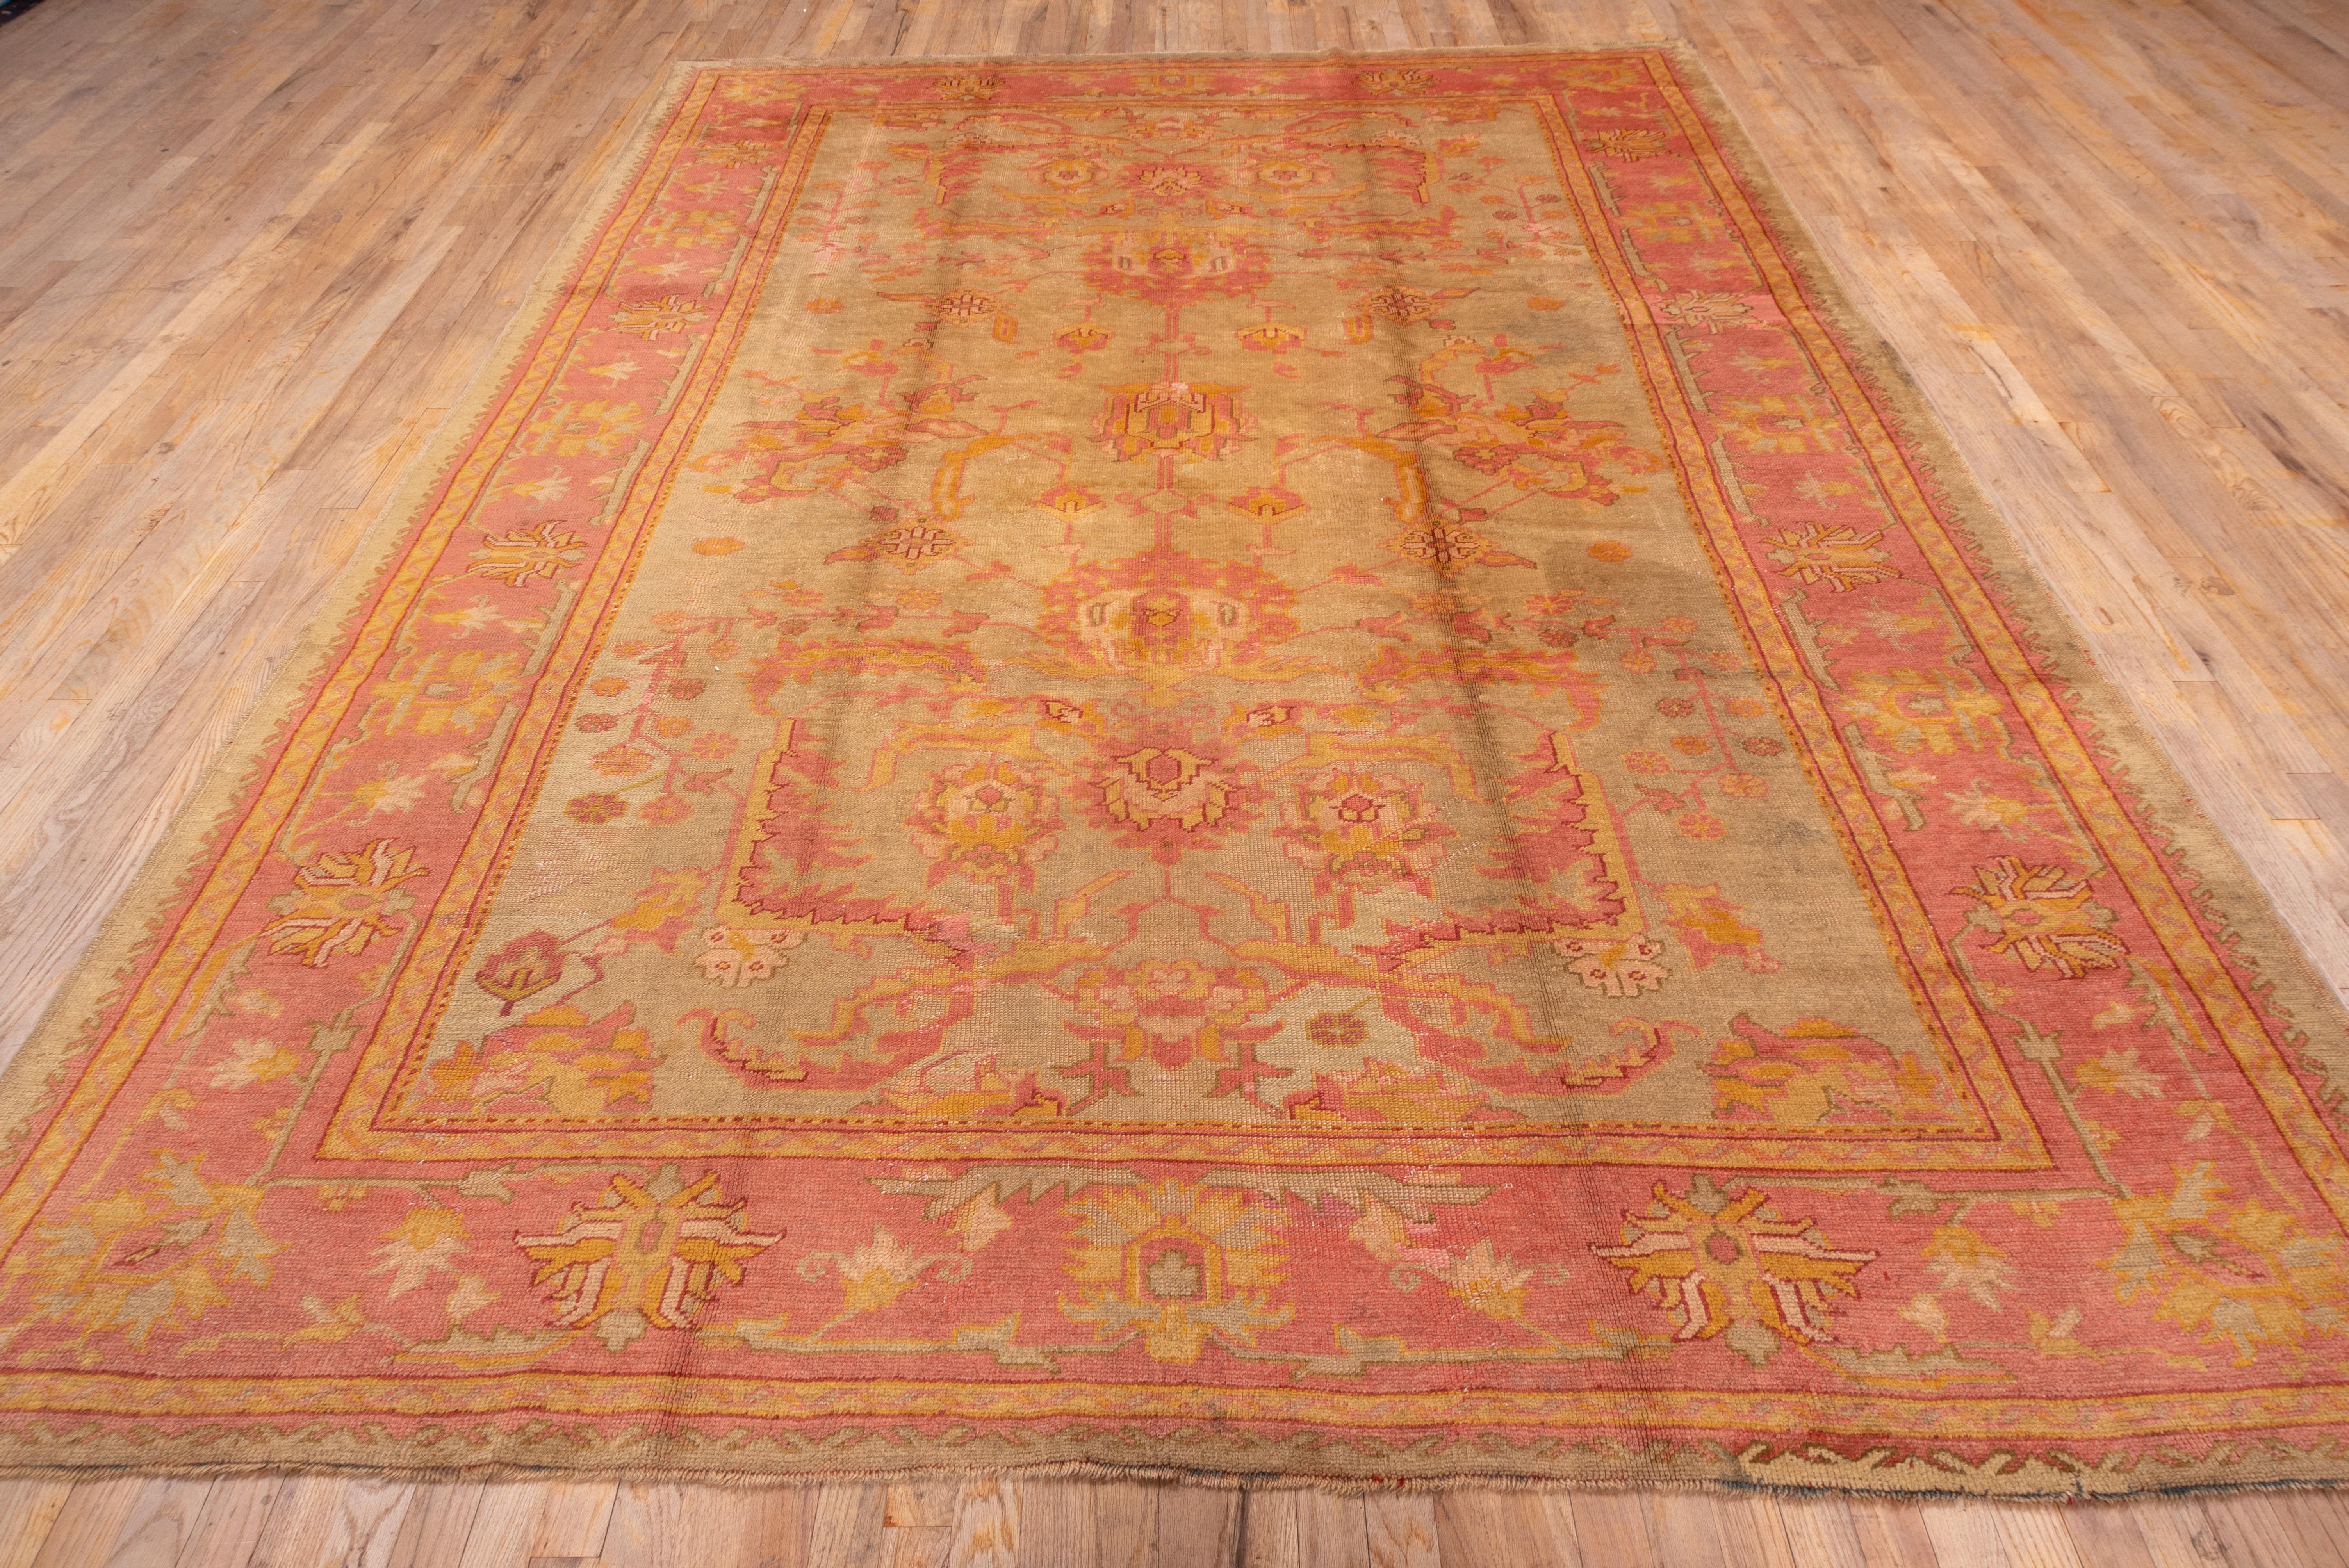 Early 20th Century Authentic Antique Turkish Rug, Pale Green All-Over Field, Pink and Gold Borders For Sale